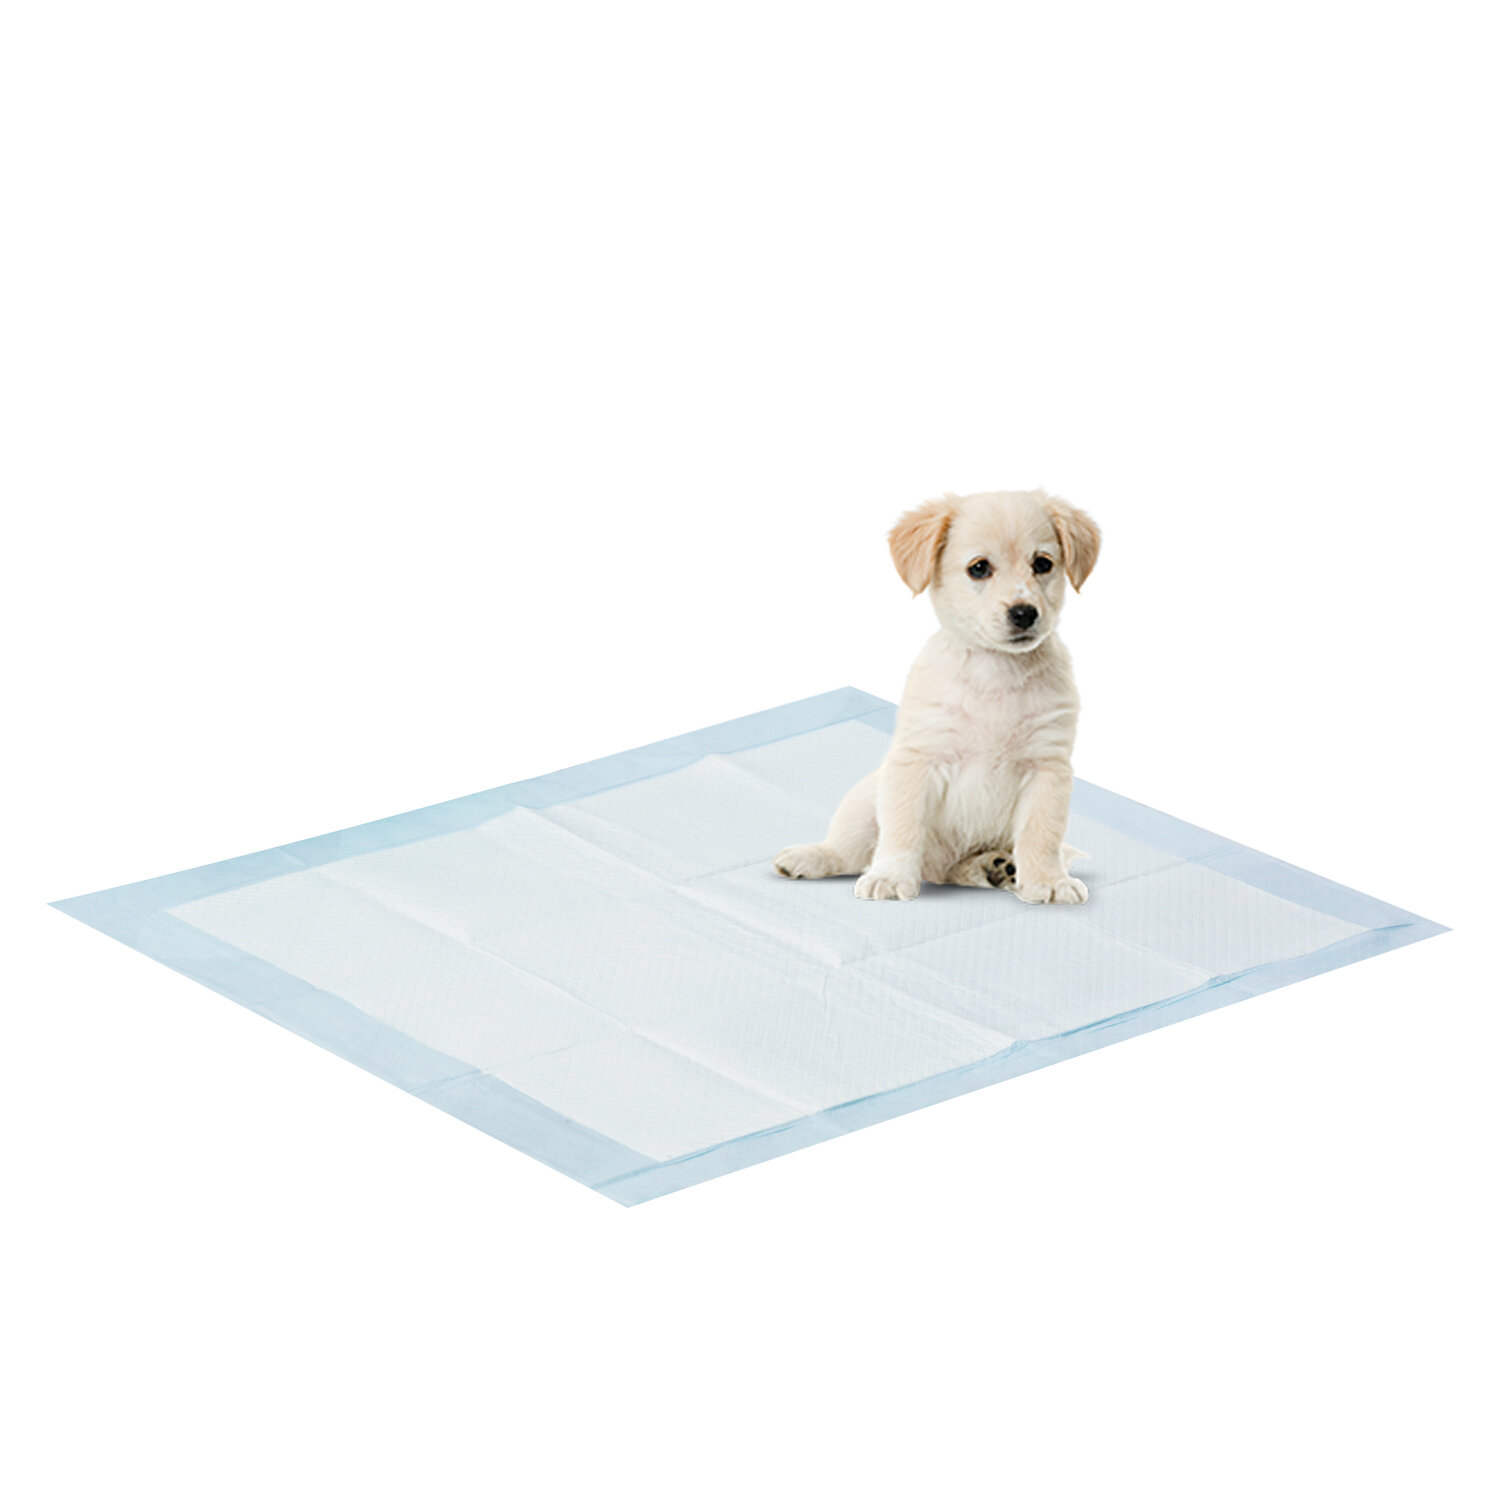 Waterproof Dog Food Mat Washable Dog Pee Pads Non-slip Absorbent Dog Bowl  Mat Large Washable Puppy Pee Pads for Dogs Doggy Cats Reusable 